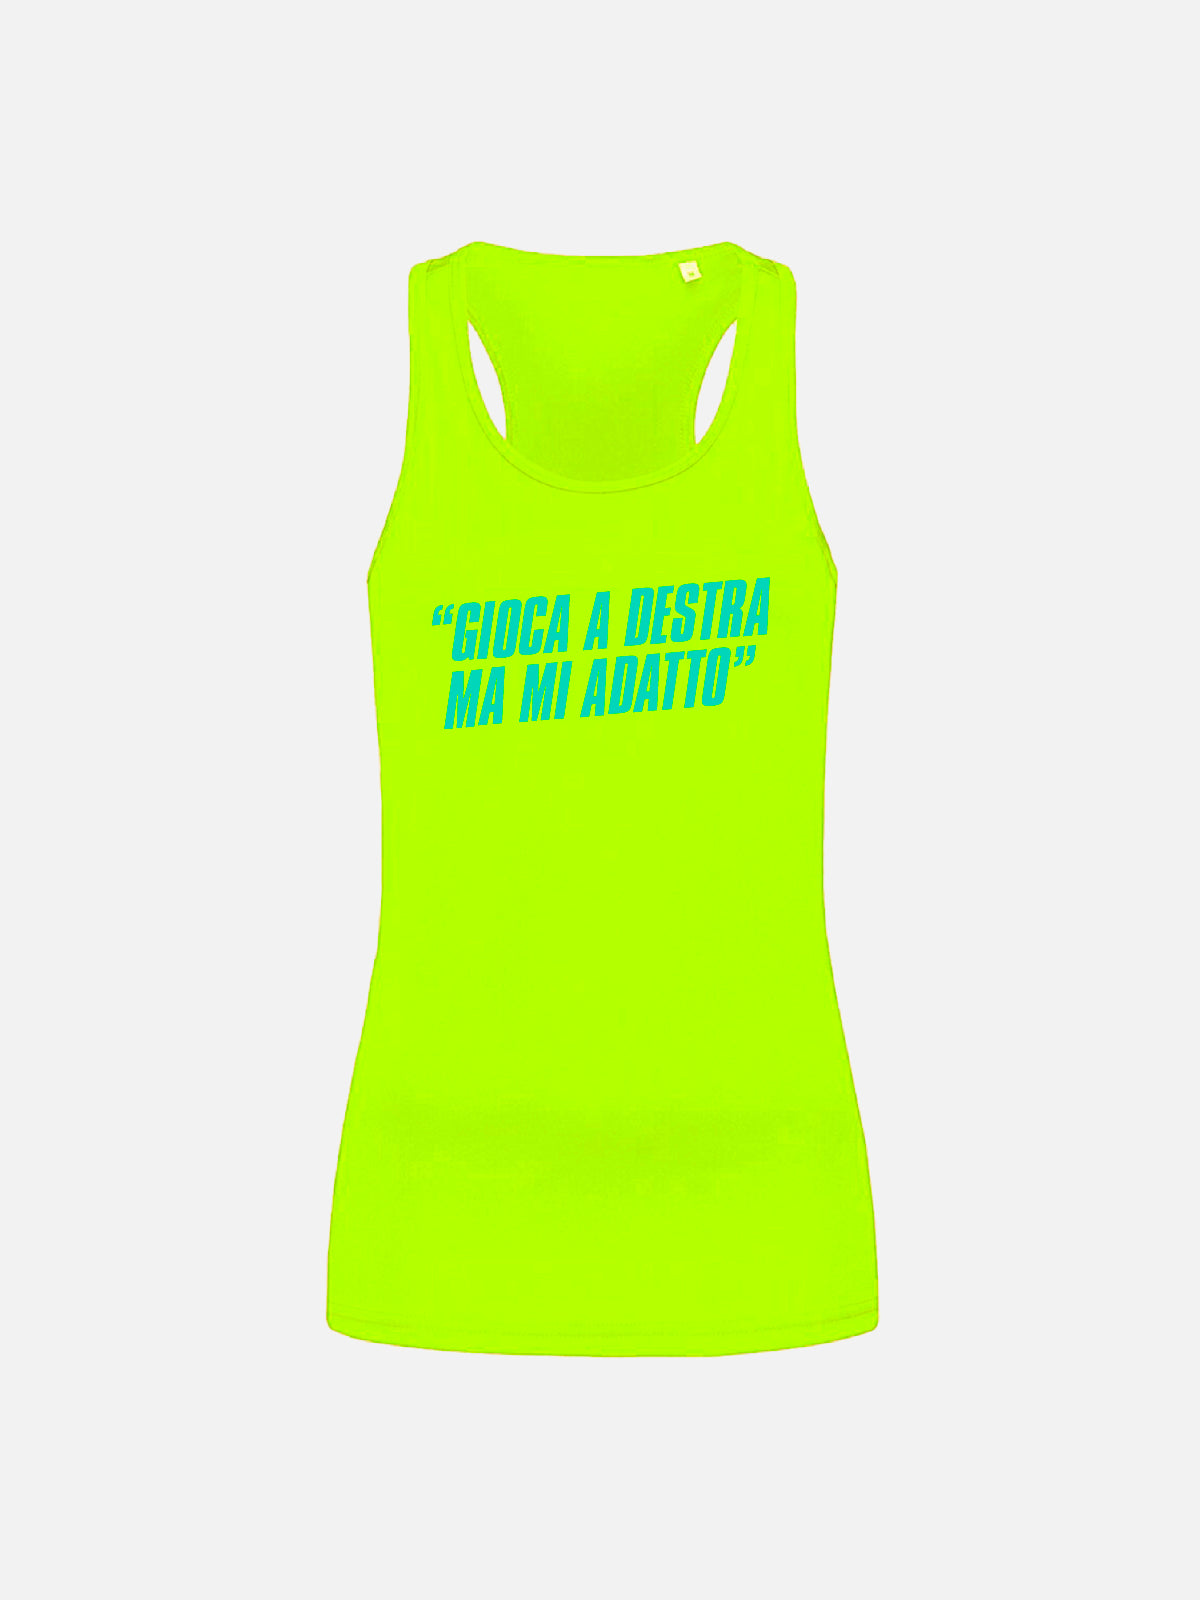 Customized Tank Top - “I Play Right But I Adapt”